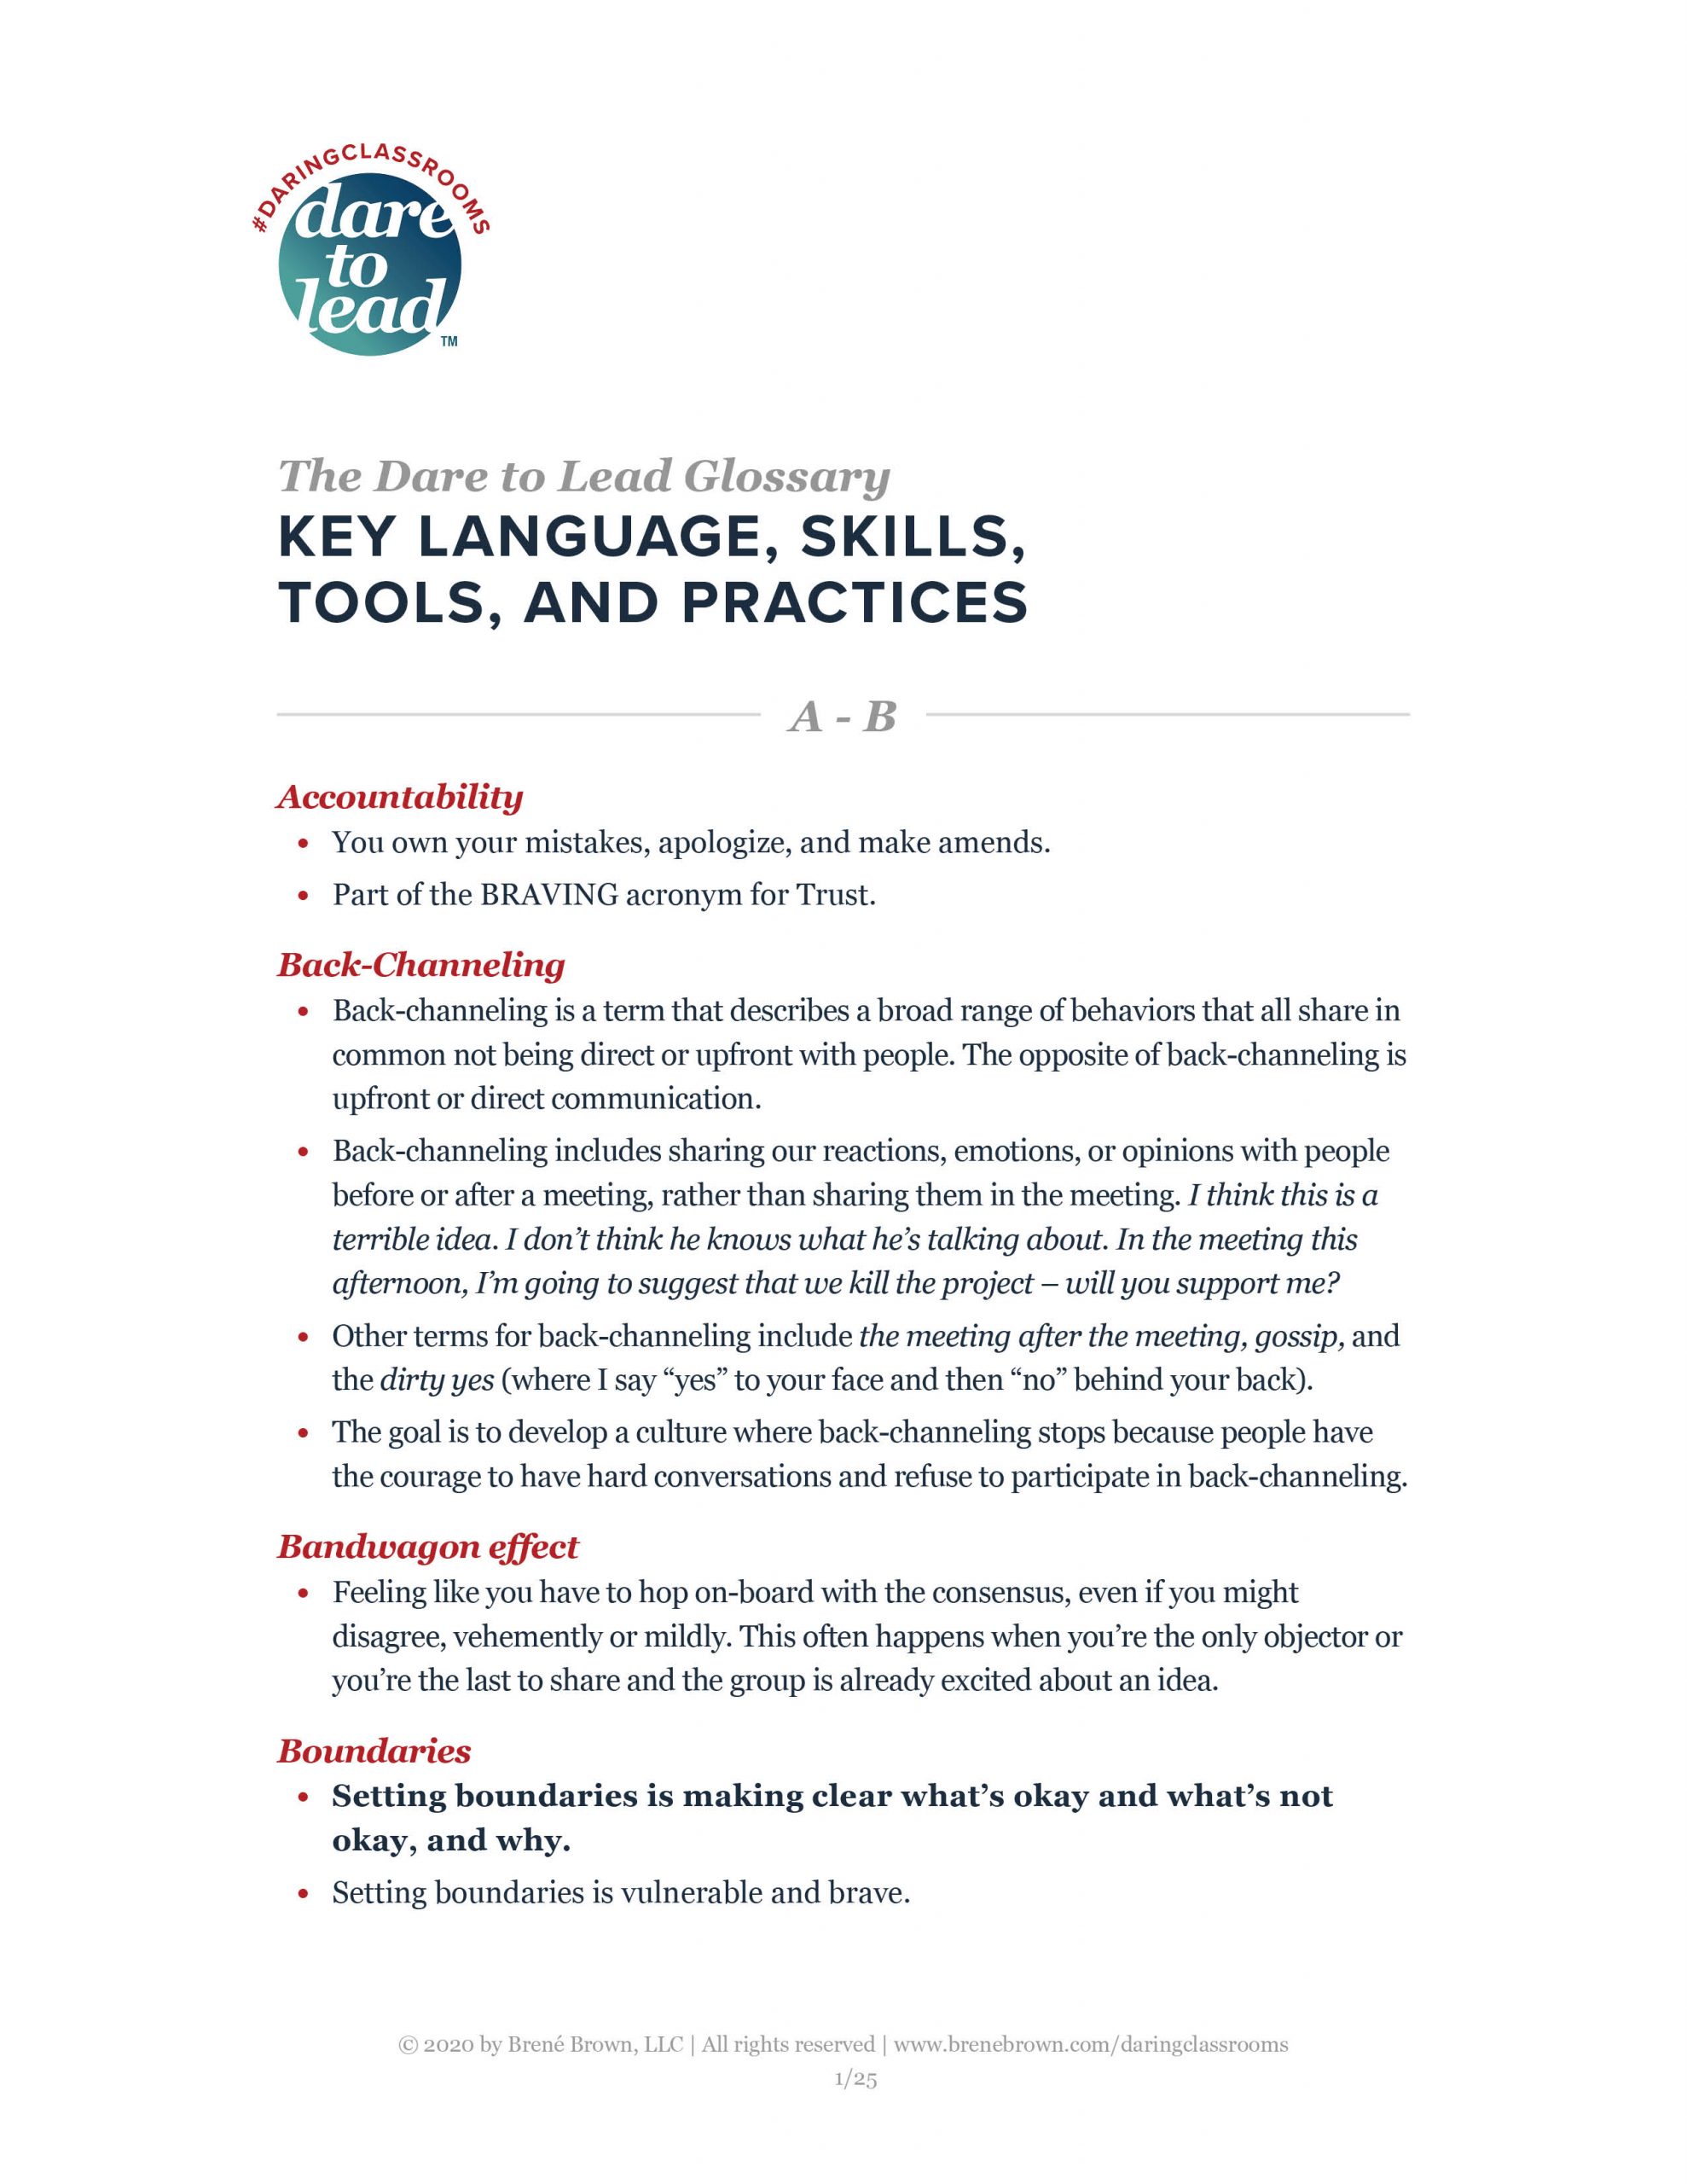 The Dare to Lead Glossary of Key Language, Skills, Tools, and Practices